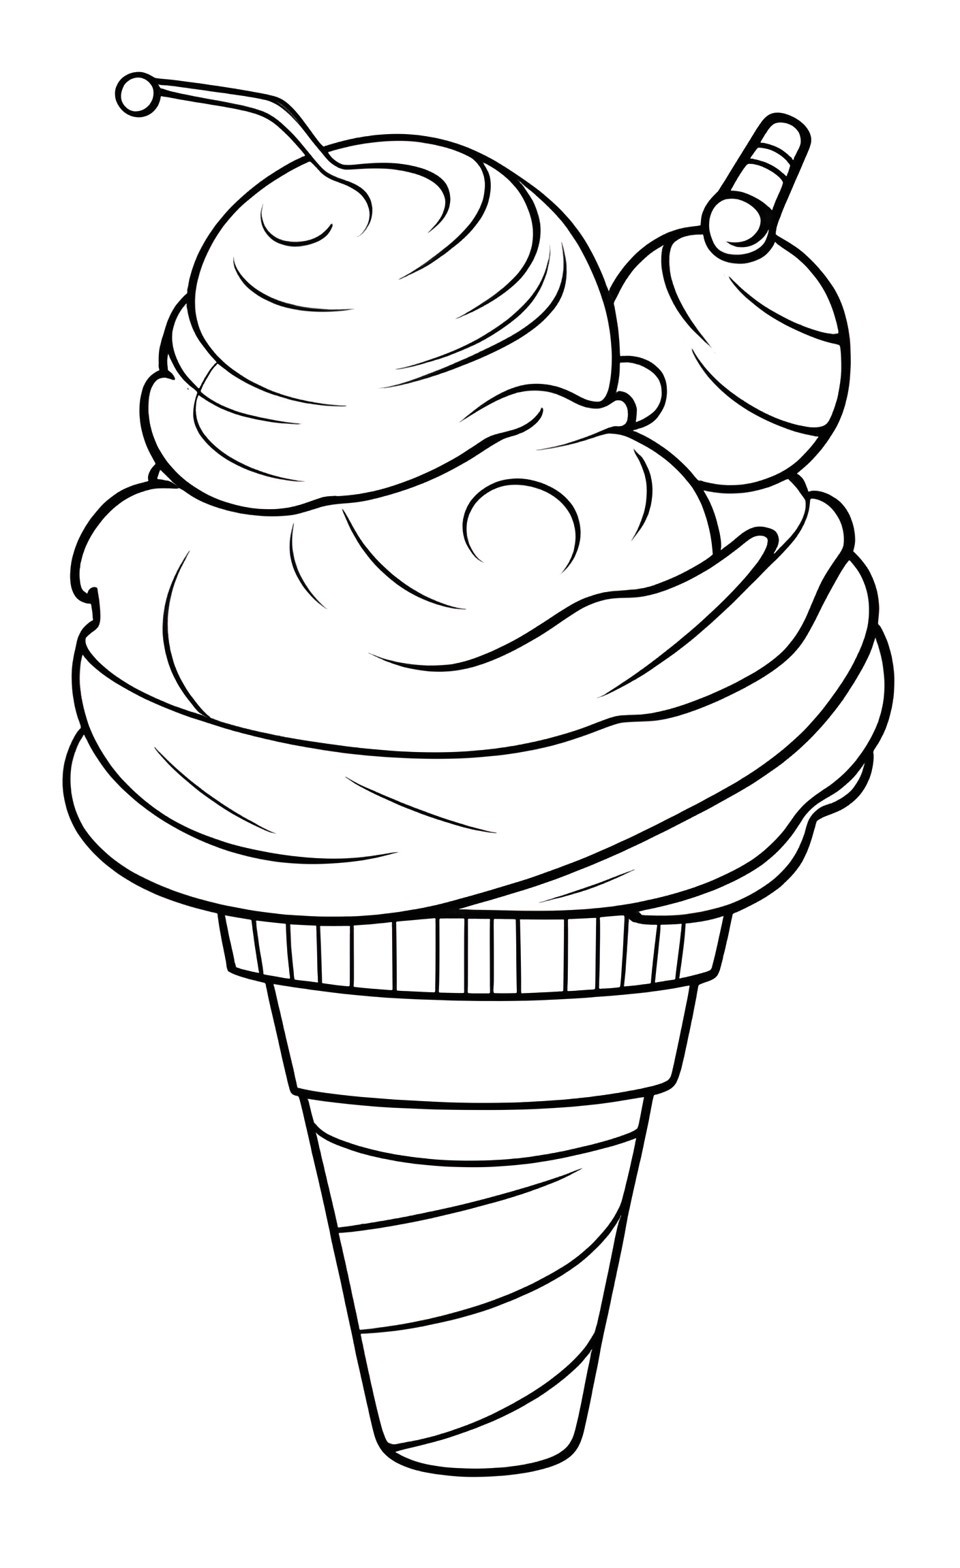 Simple Summer Ice Cream coloring pages for kids